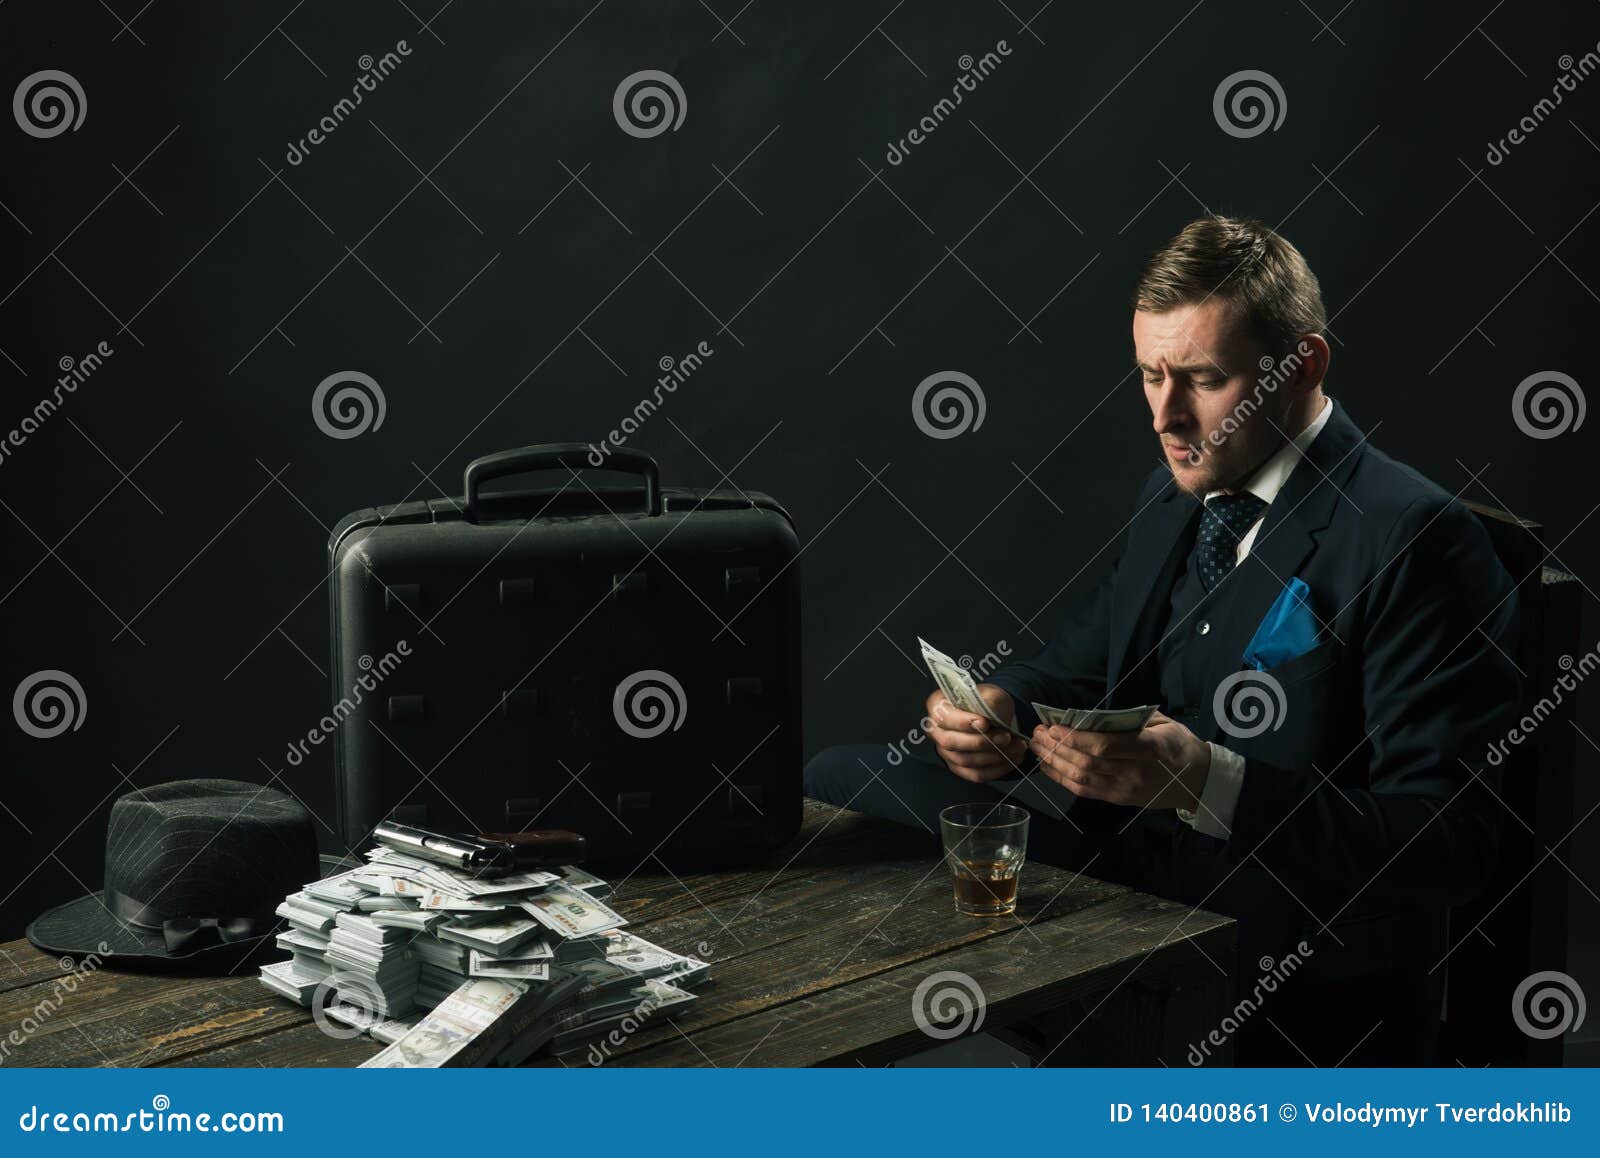 man in suit. mafia. making money. money transaction. businessman work in accountant office. small business concept